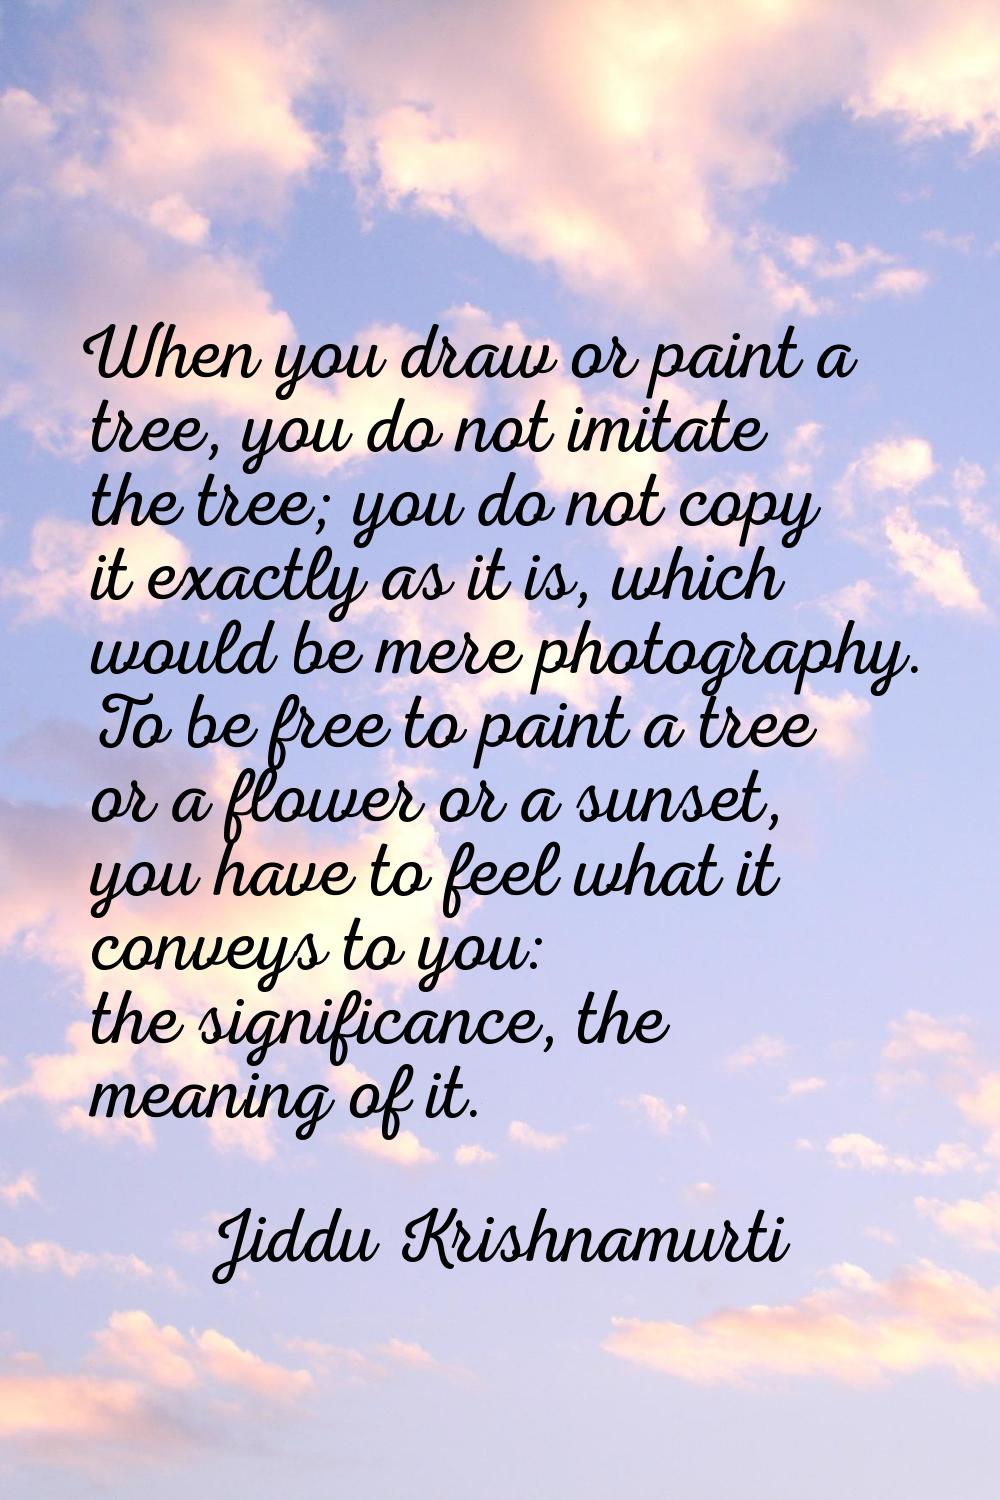 When you draw or paint a tree, you do not imitate the tree; you do not copy it exactly as it is, wh